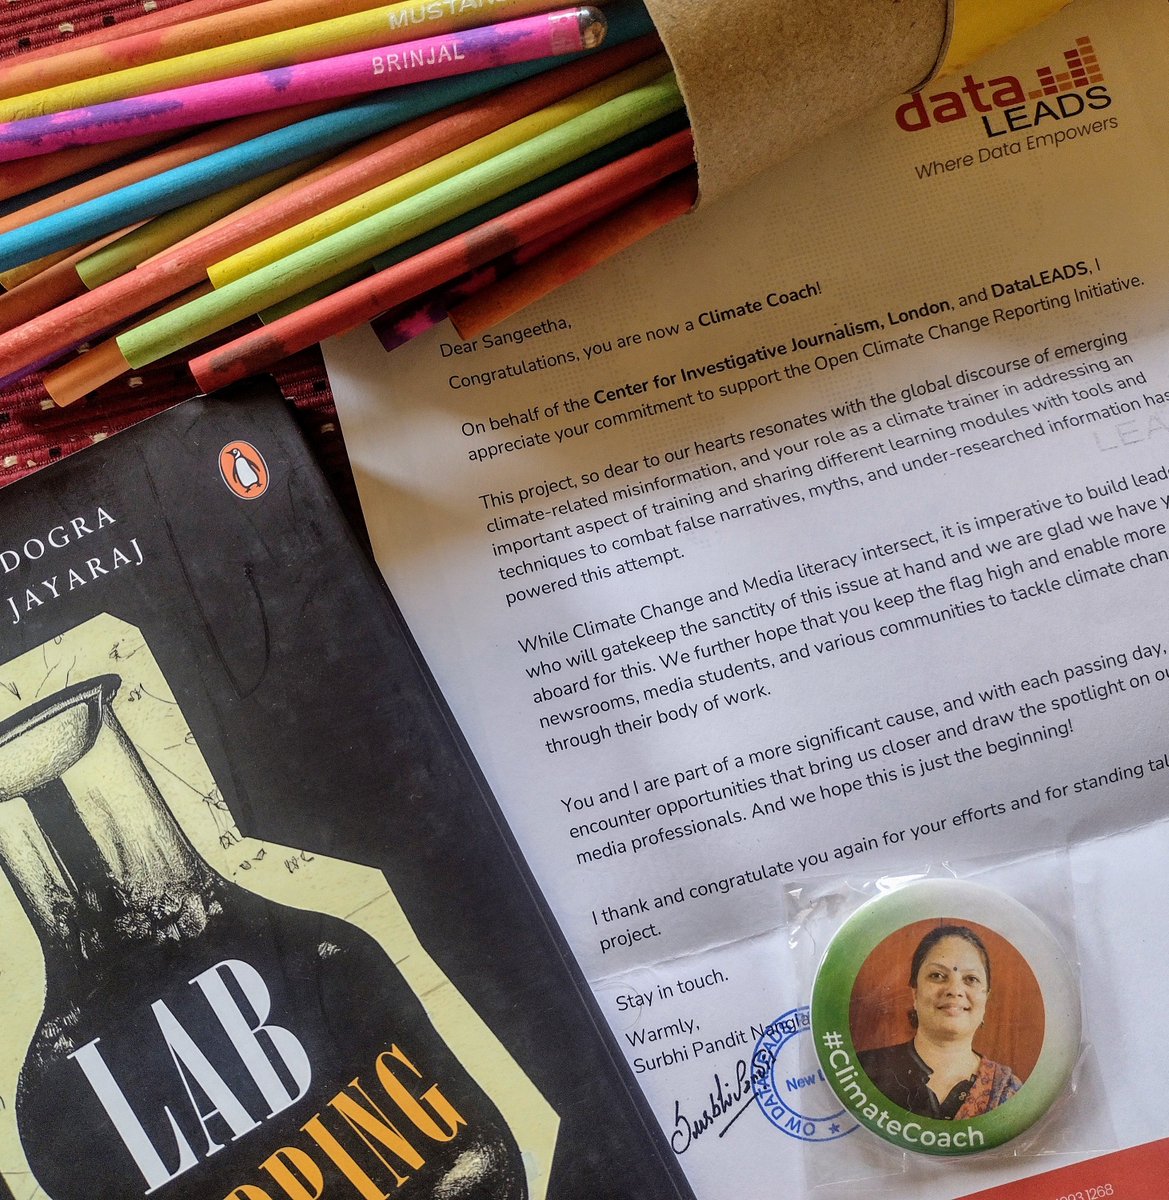 Grateful to @data_LEADS & @cijournalism for the warm appreciation & thoughtful goodies! 

Proud to wear my #ClimateCoach badge & join you in fighting #misinformation on #climate change

@earthjournalism @Internews @MIB_India @mssrf @CoveringClimate @gijn @SciComm_India @moefcc